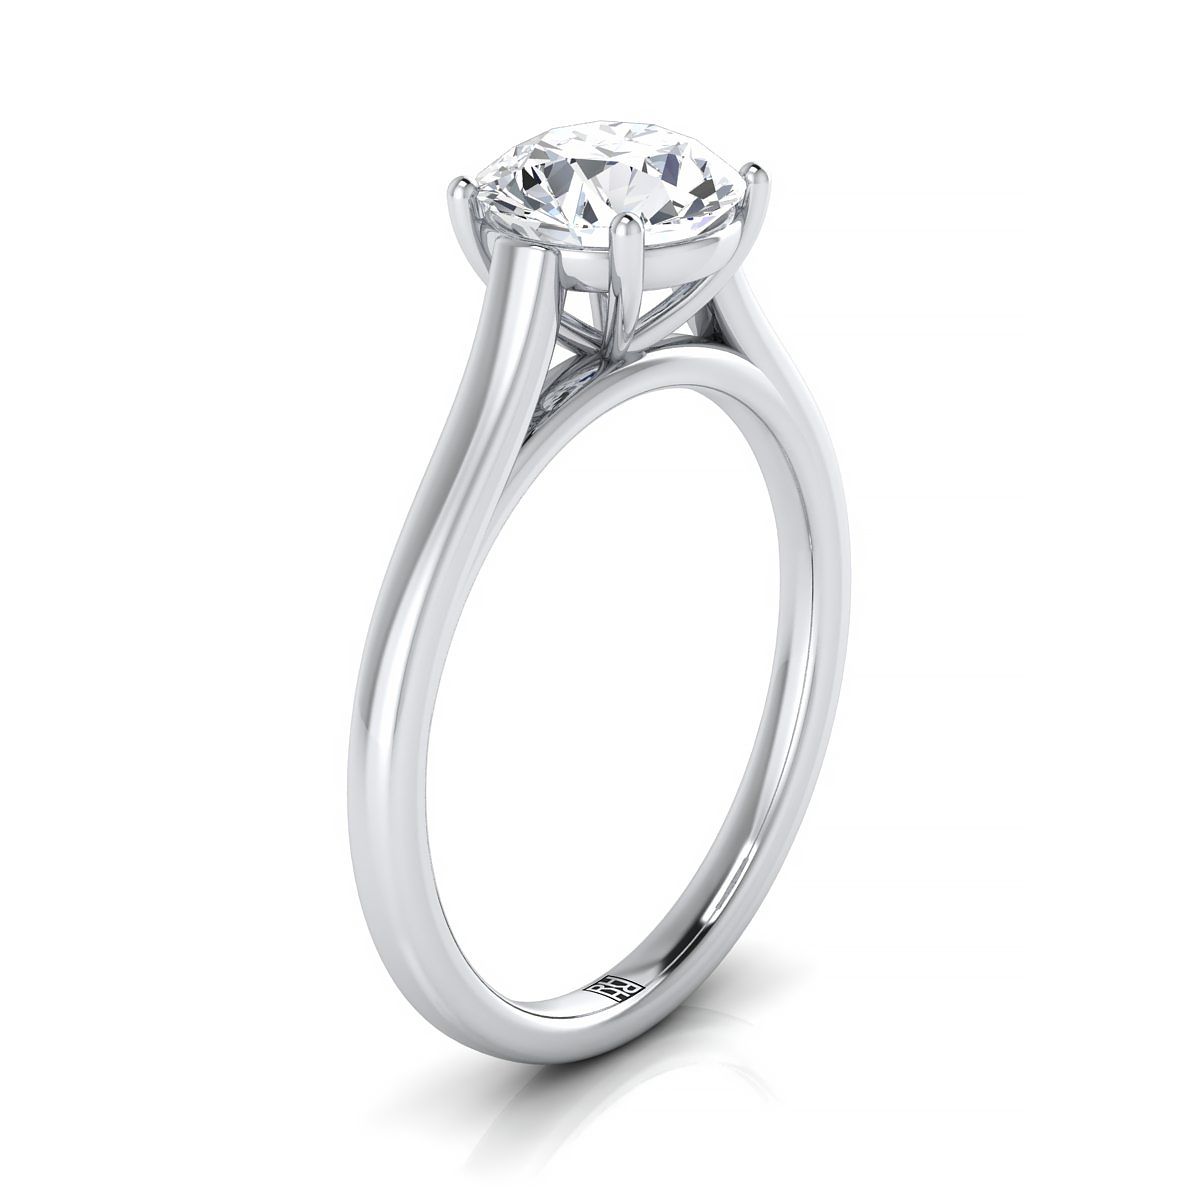 14K White Gold Round Brilliant  Elegant Cathedral Solitaire Engagement Ring